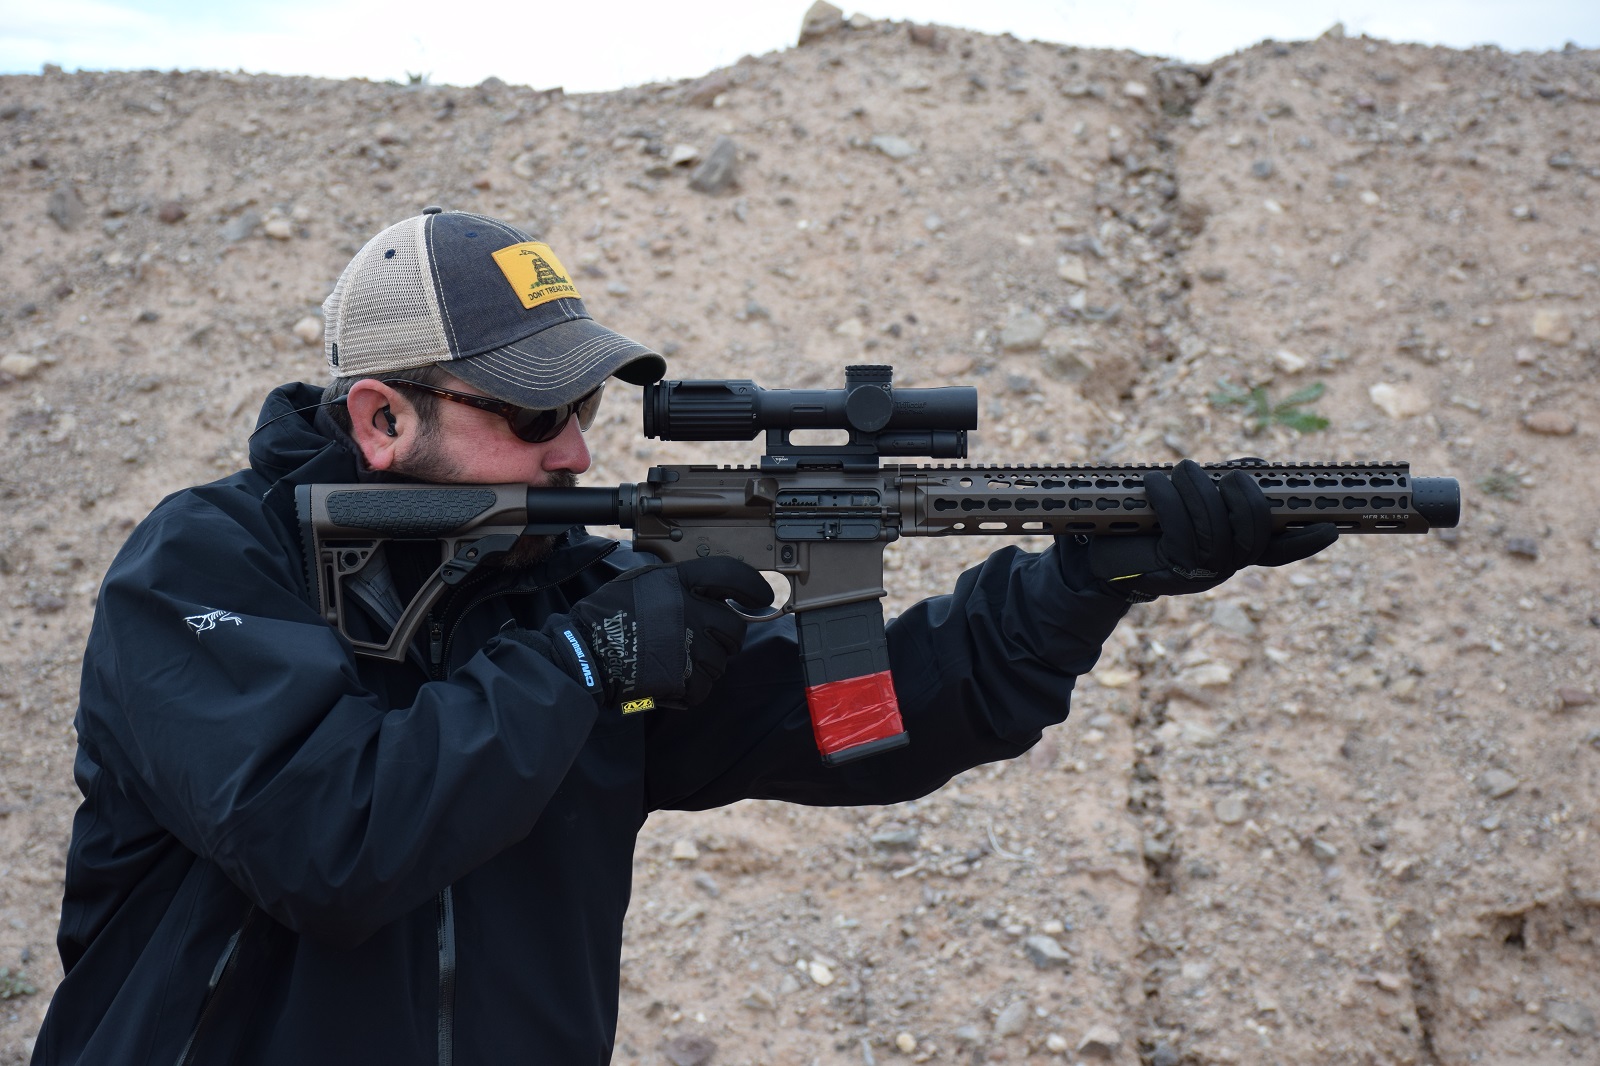 Show 2016 this year they introduced a new generation of their 300 BLK integ...